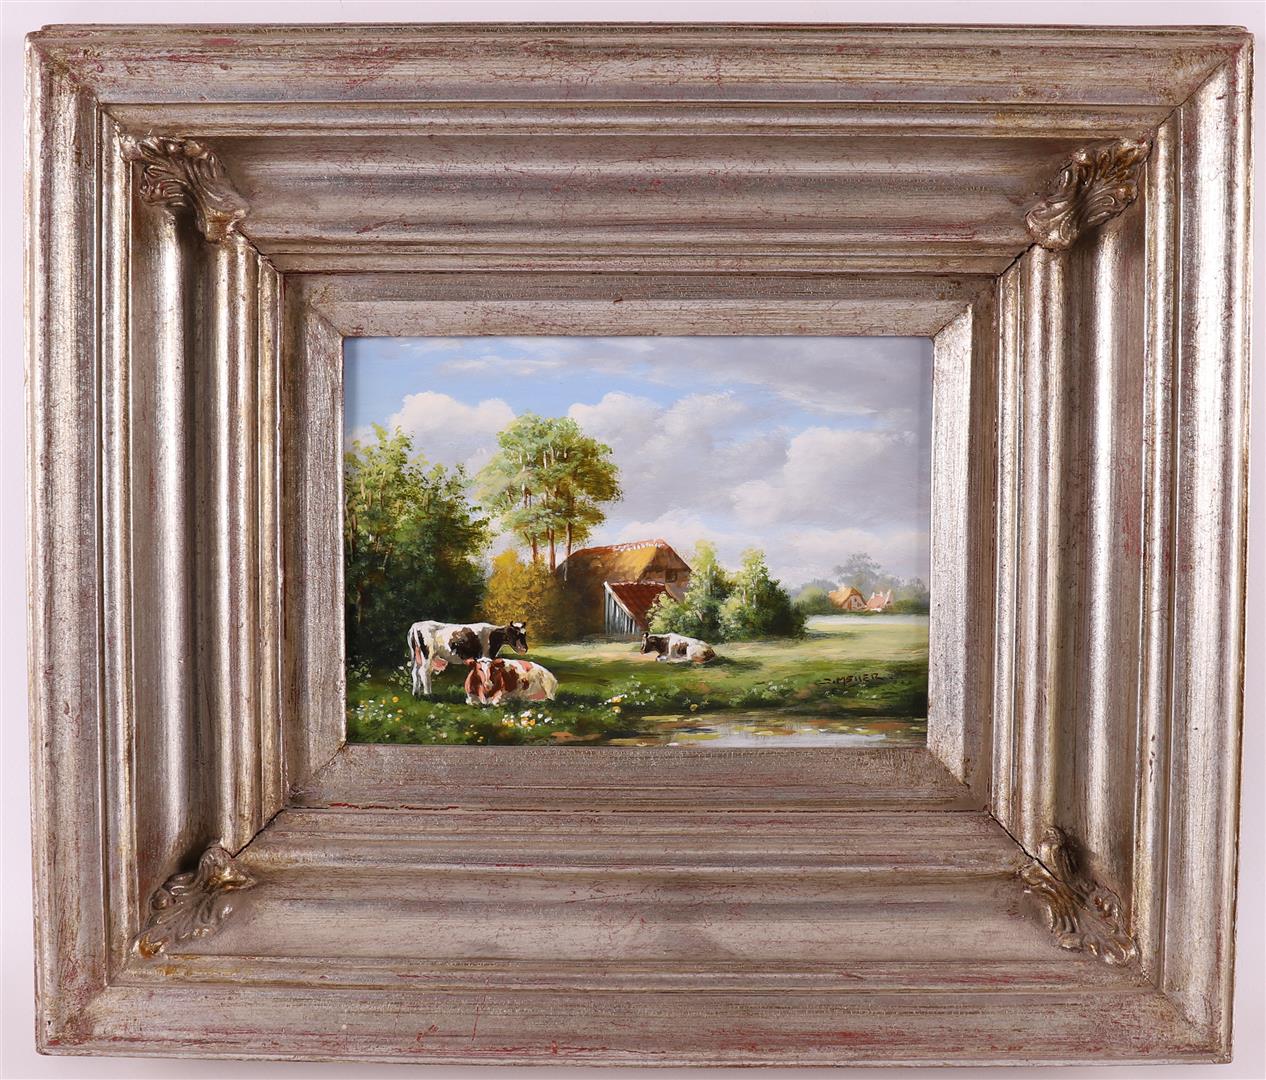 Meijer, J 'Cows in a Landscape with Farmhouse Housing',